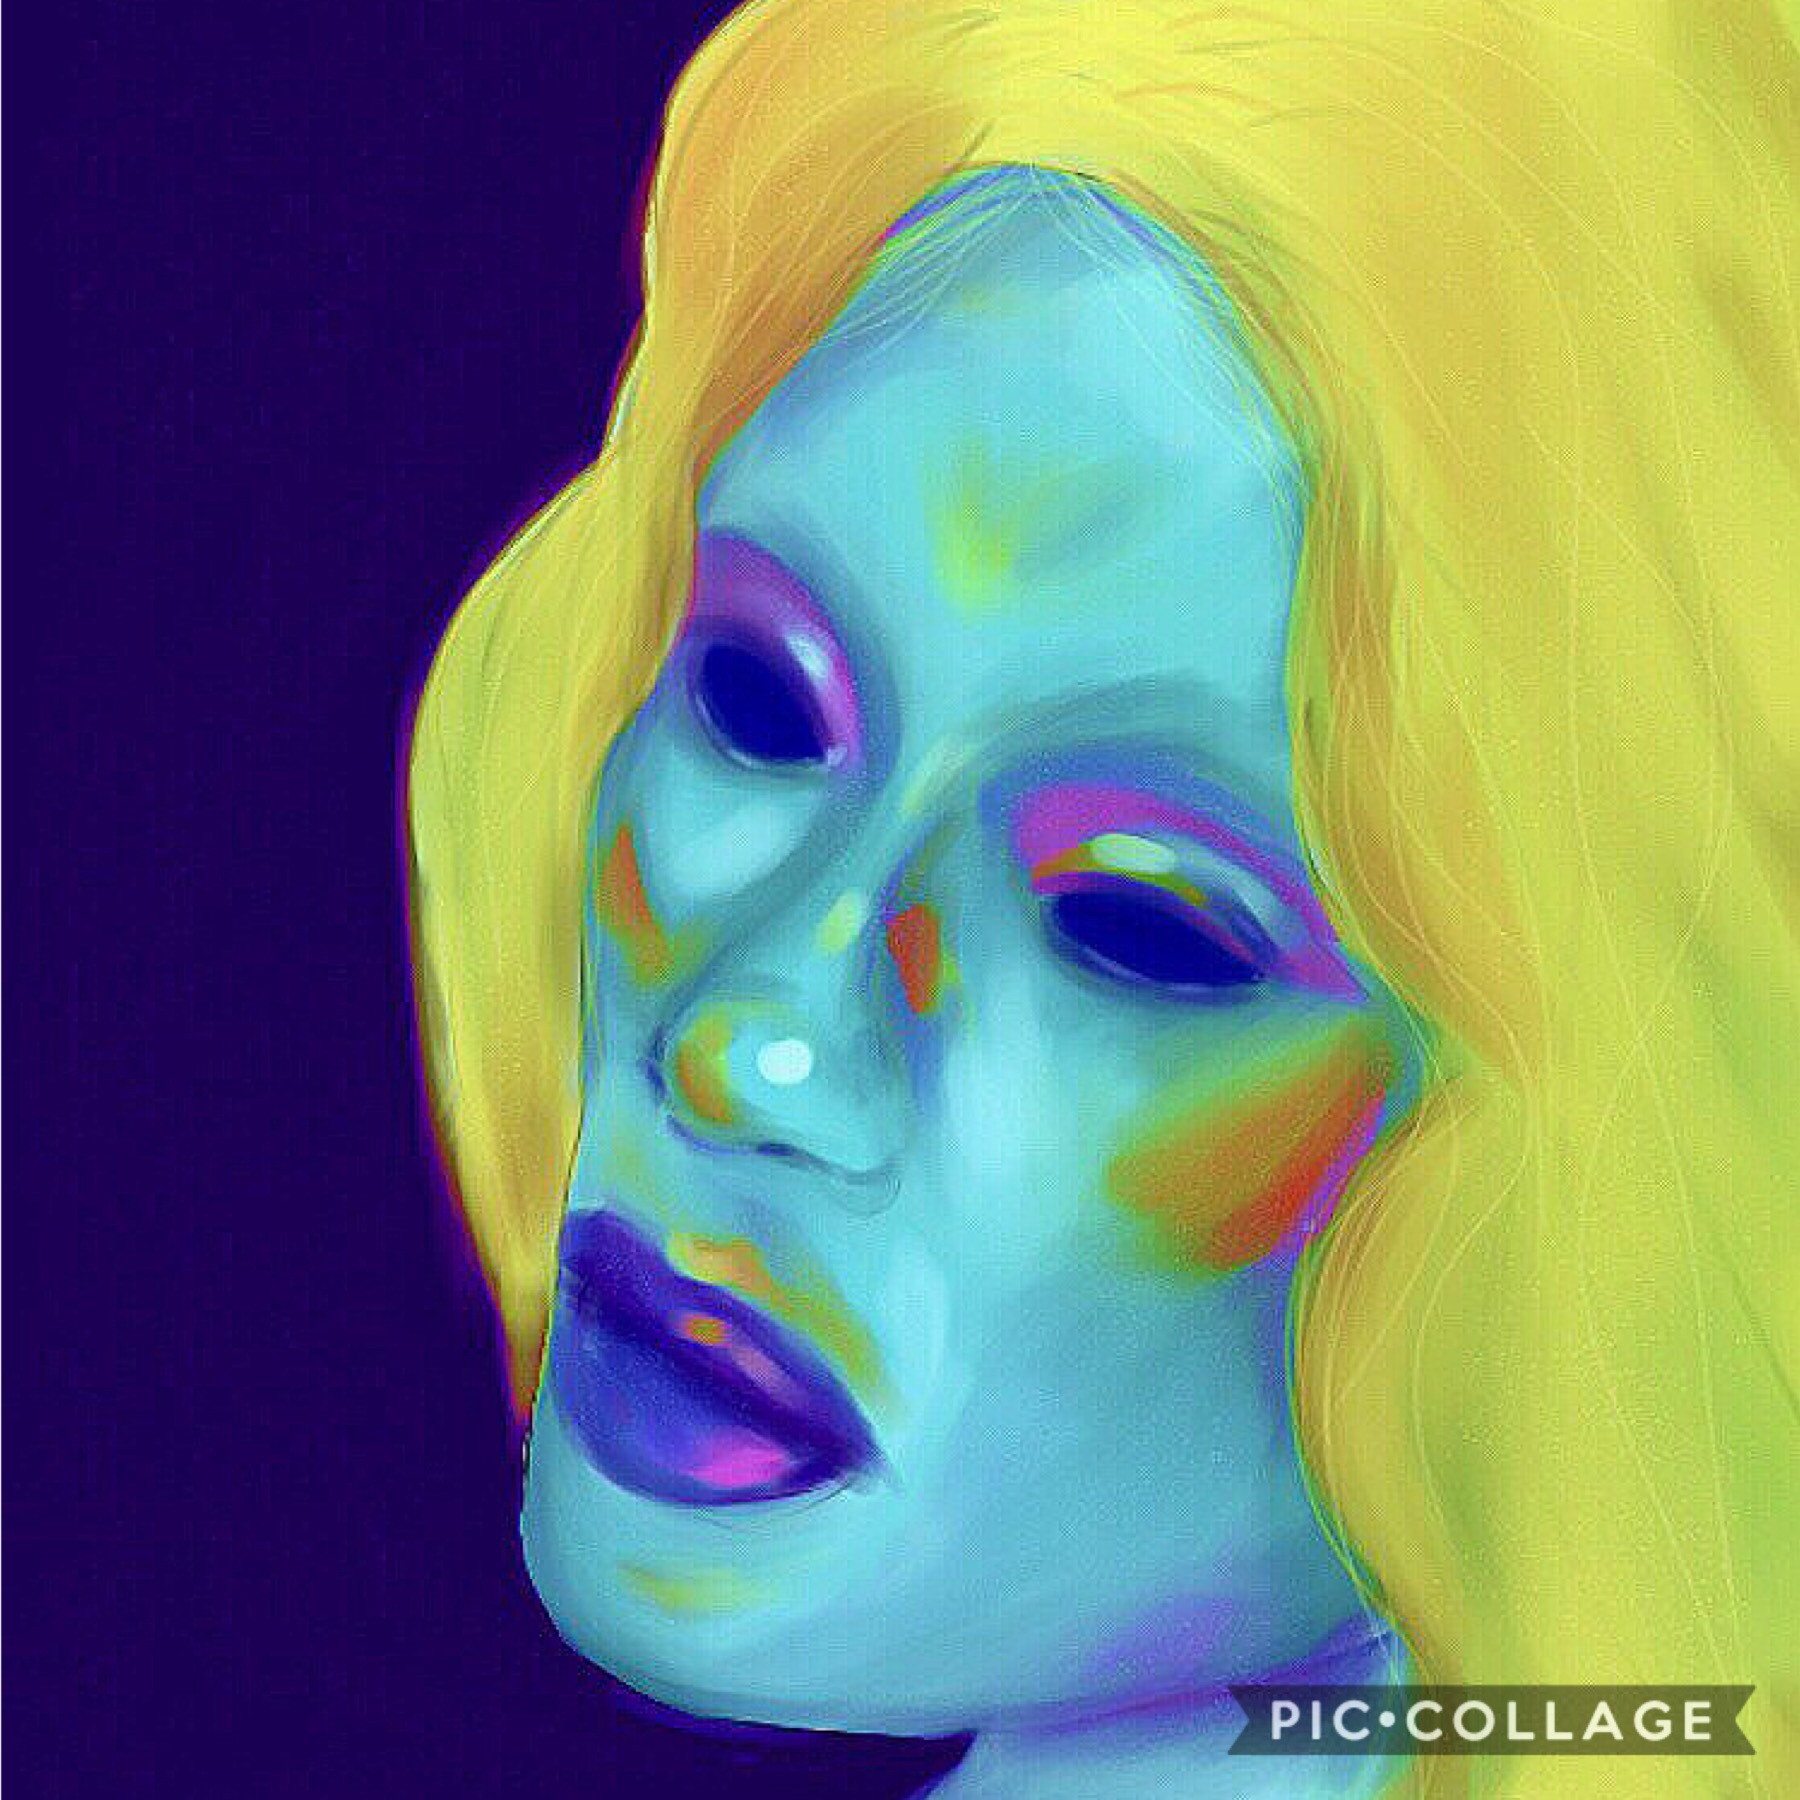 i wanted to draw something weird like an alien or sumn n this was the result 😗 idk if i like it i did it rlly quickly but iridescence inspired me 😳☝🏻